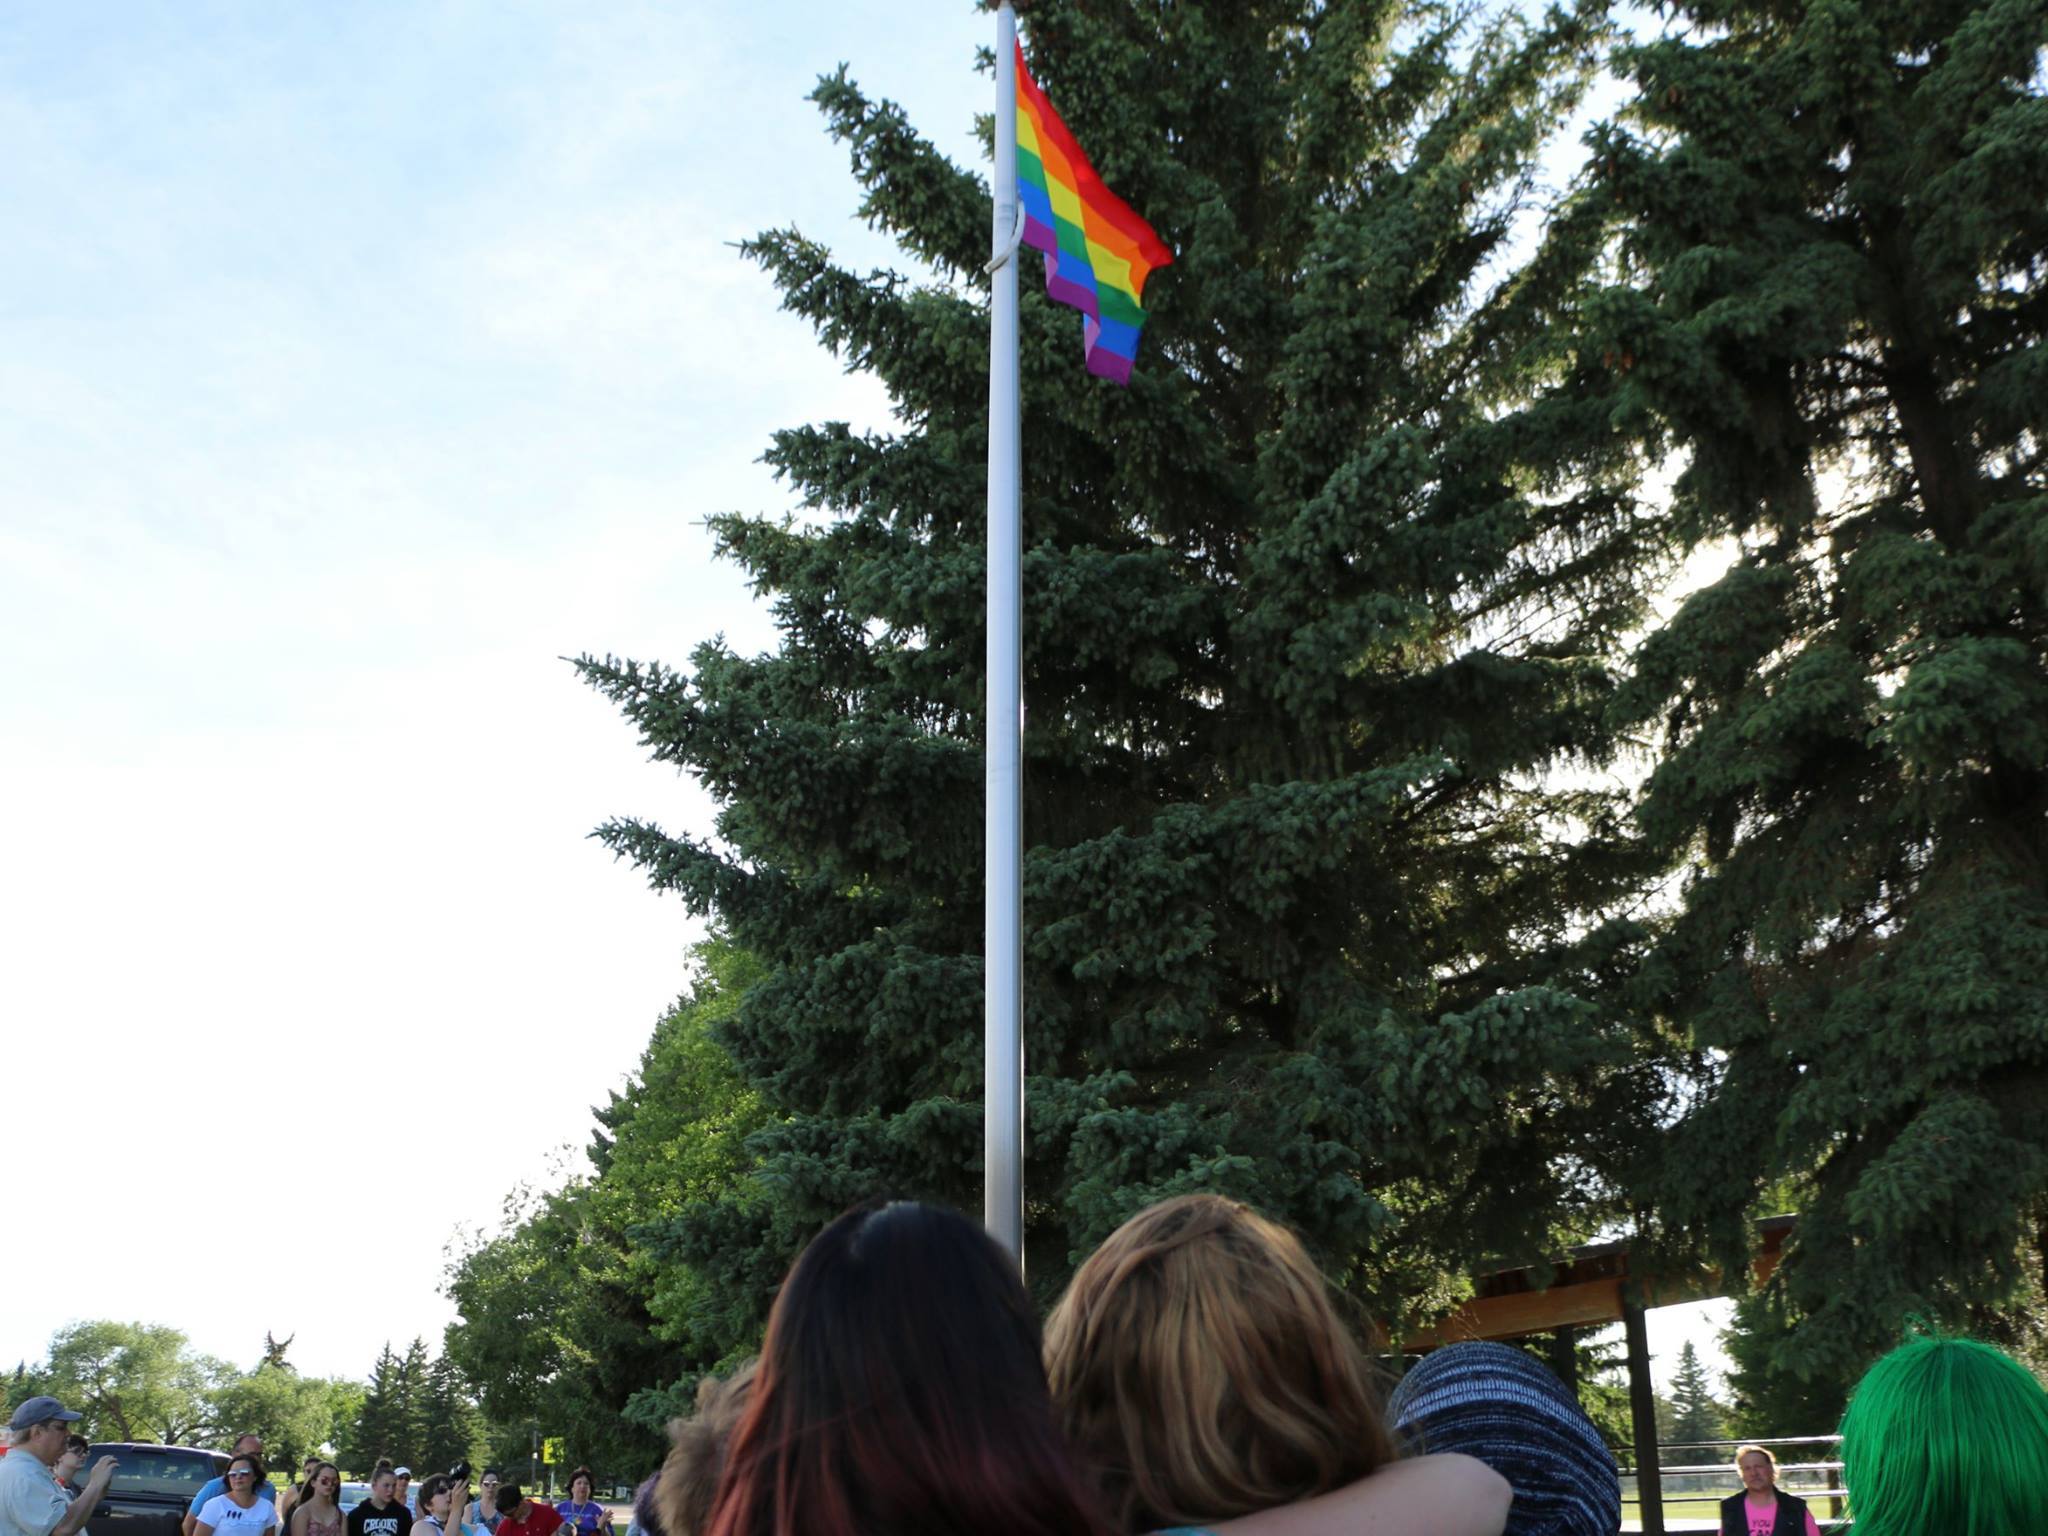 Two people watching the Taber Pride flag being raised for the first time in Taber - June 12, 2017.